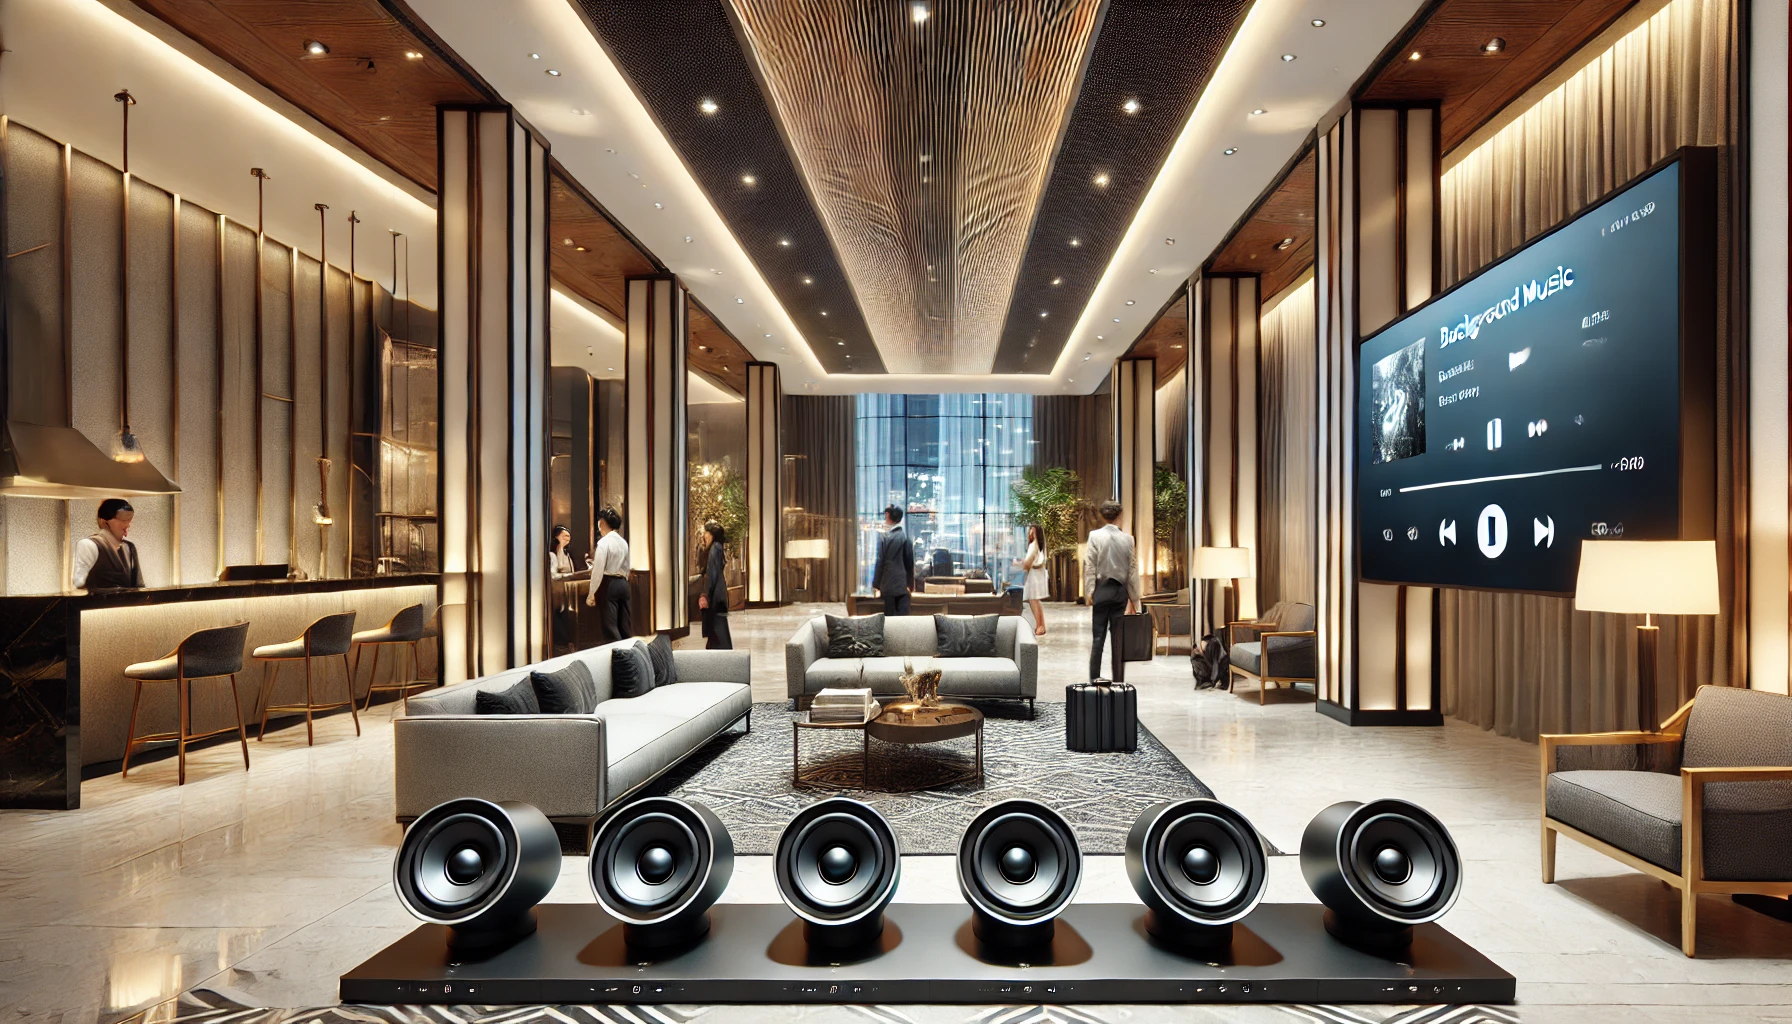 dalle 2024 07 26 16 43 27 a modern hotel lobby with a sophisticated audio system the image shows high quality speakers discreetly integrated into the ceiling and walls provid